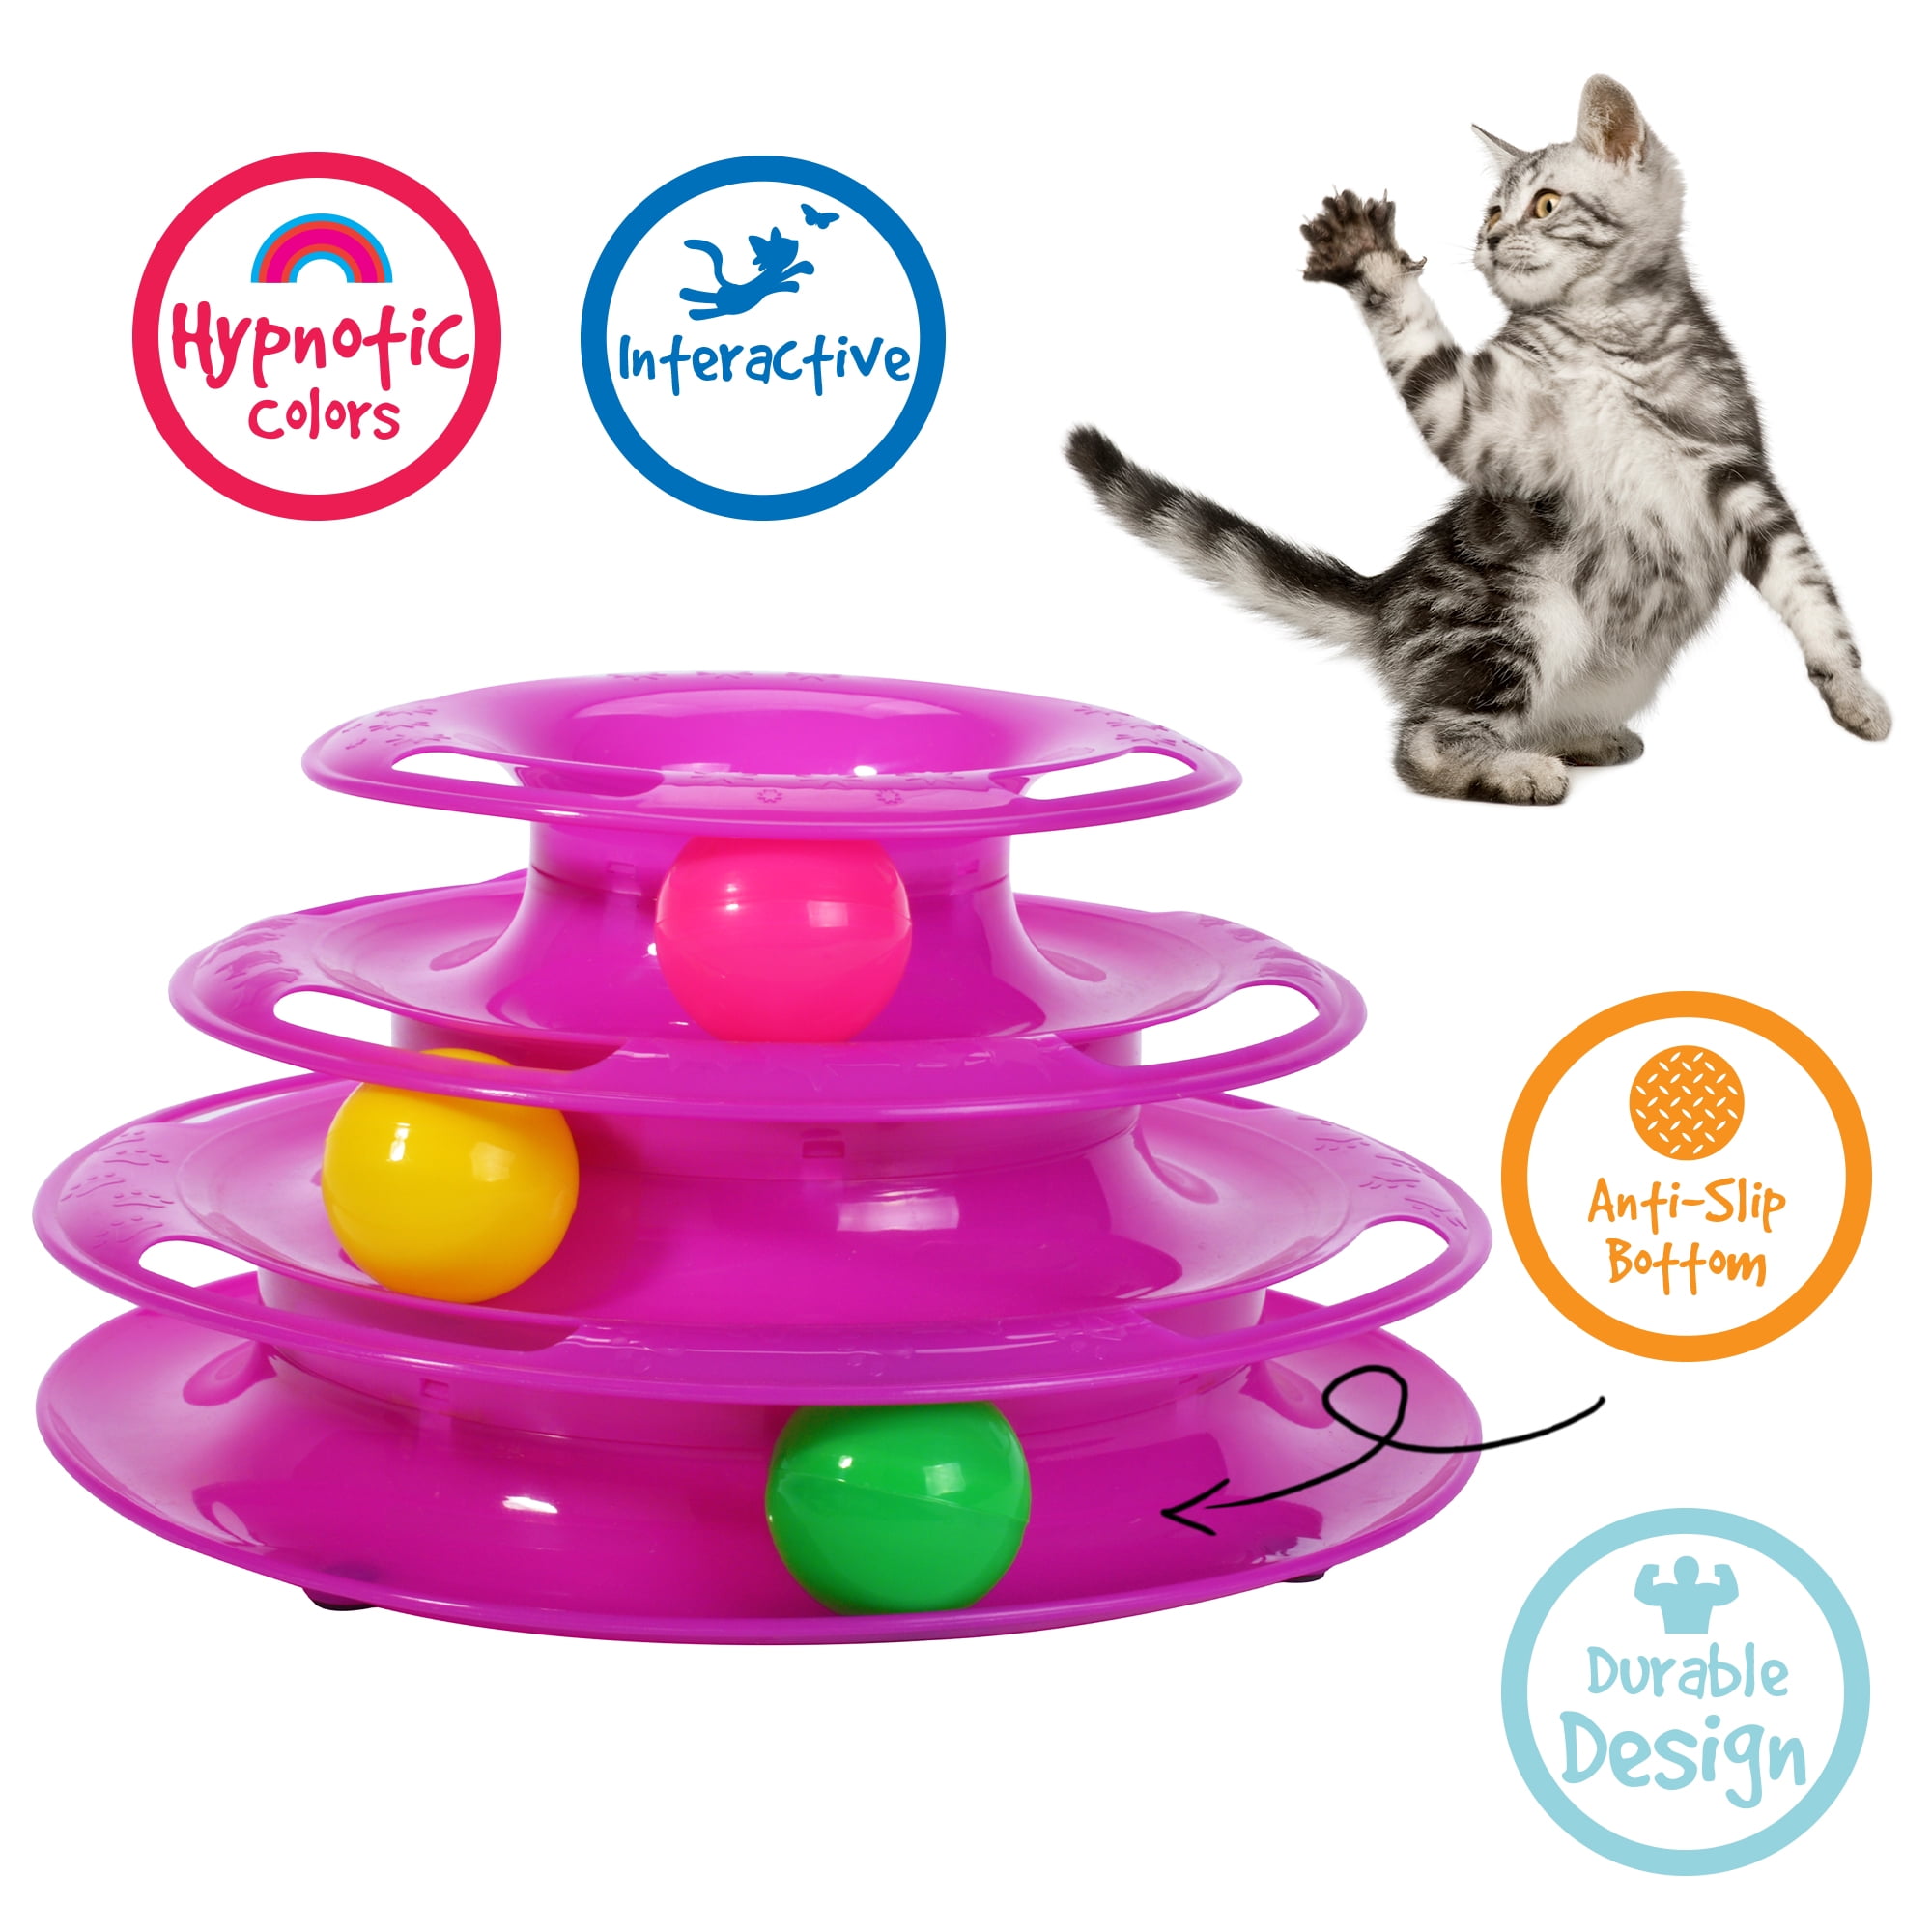 Tower of Tracks Interactive 3-Tier Cat Toy, Multi